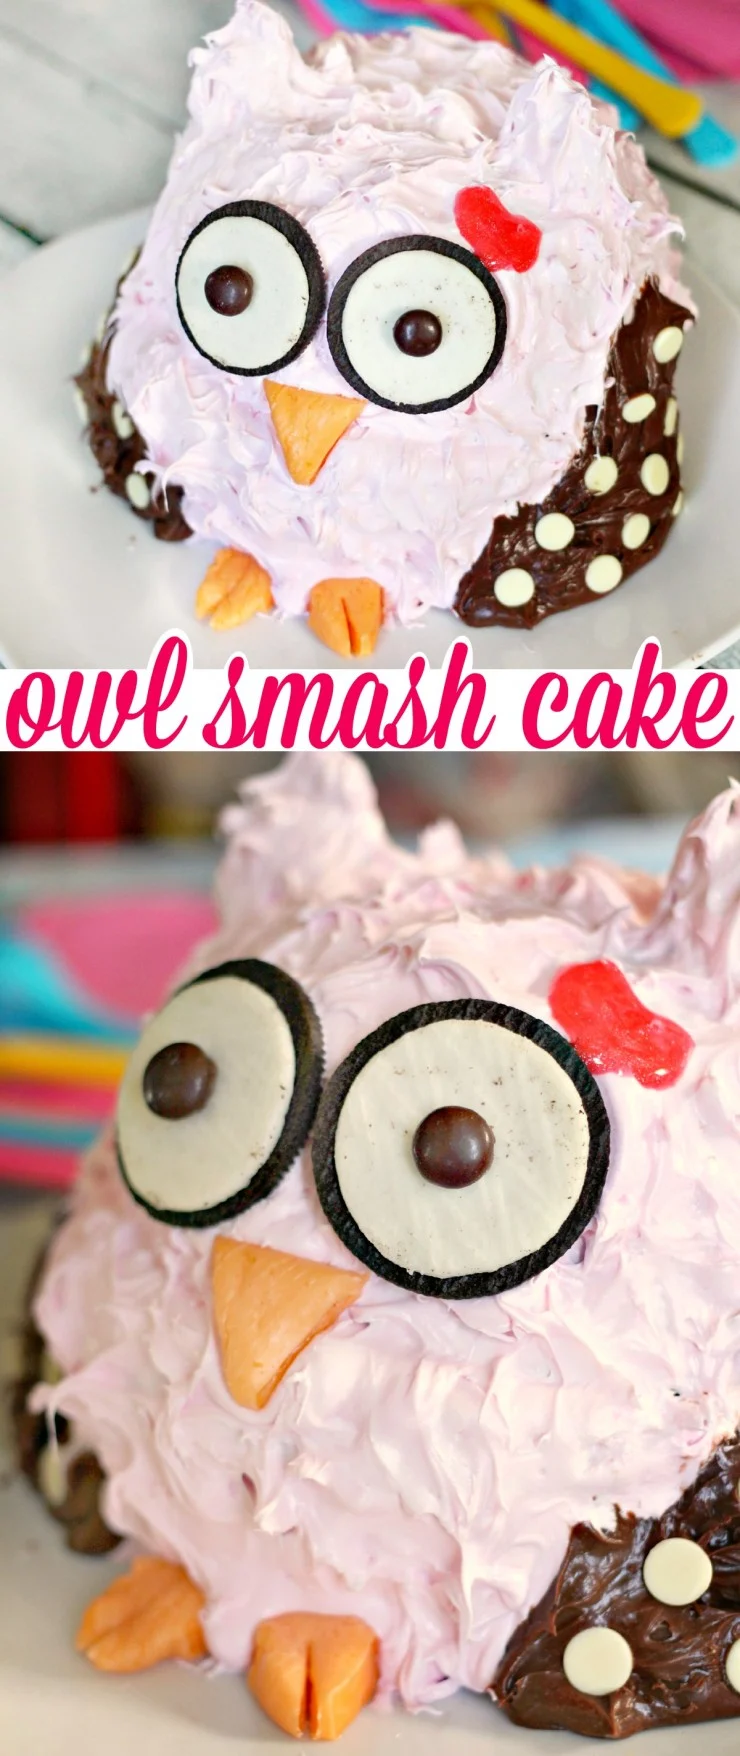 This Owl Smash Cake is an adorable first birthday cake perfect for an owl themed 1st birthday party or a cake smash photography session!